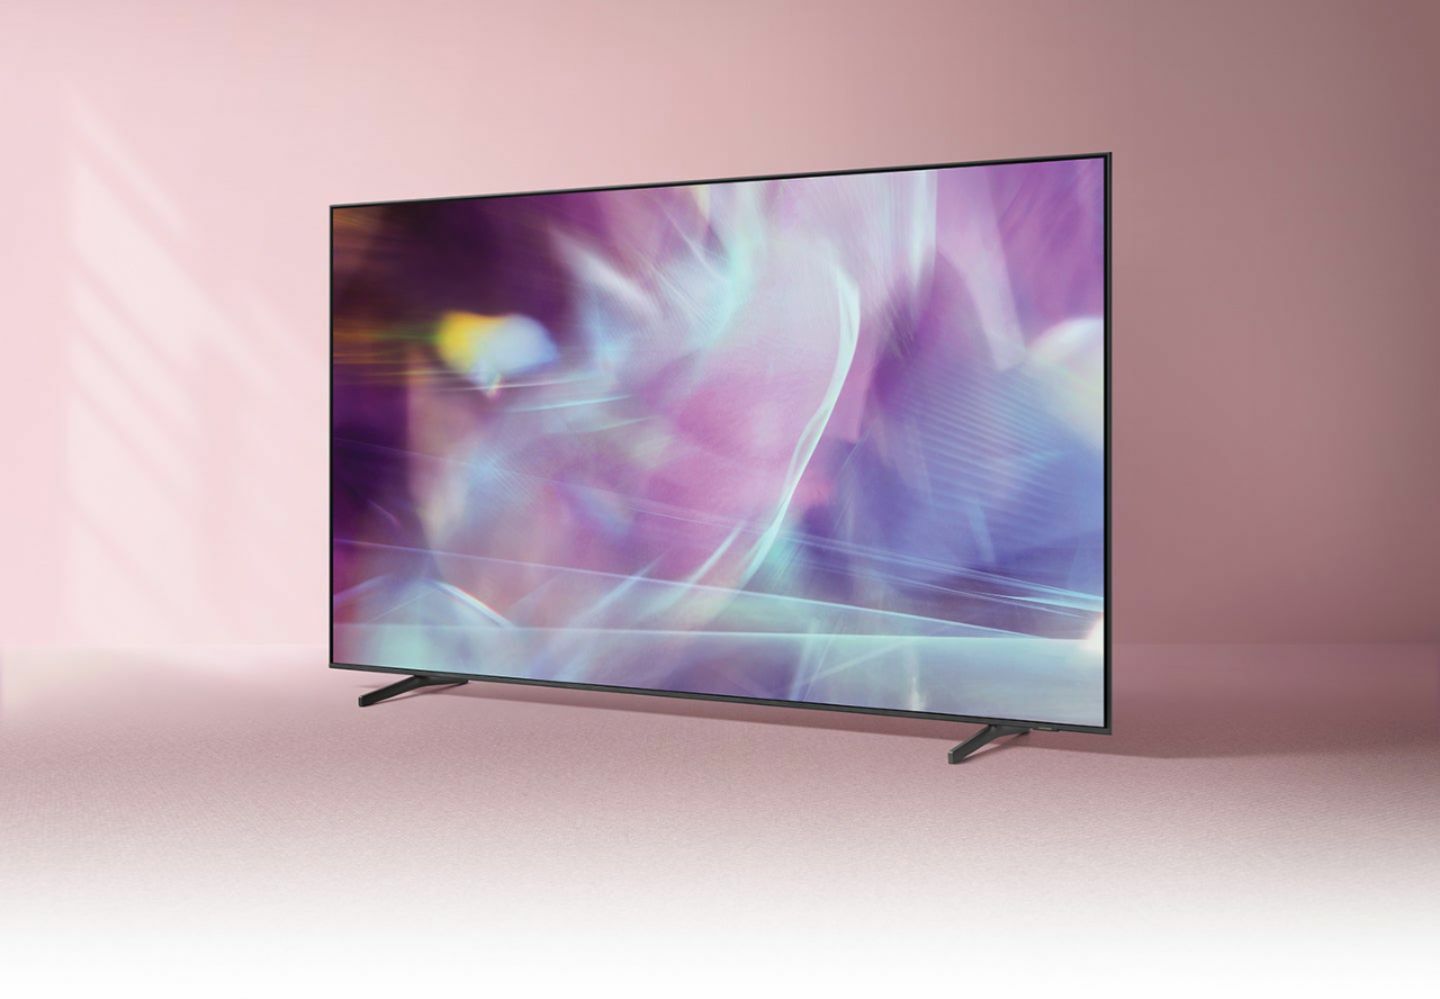 Samsung QLED TV with pink set in the background